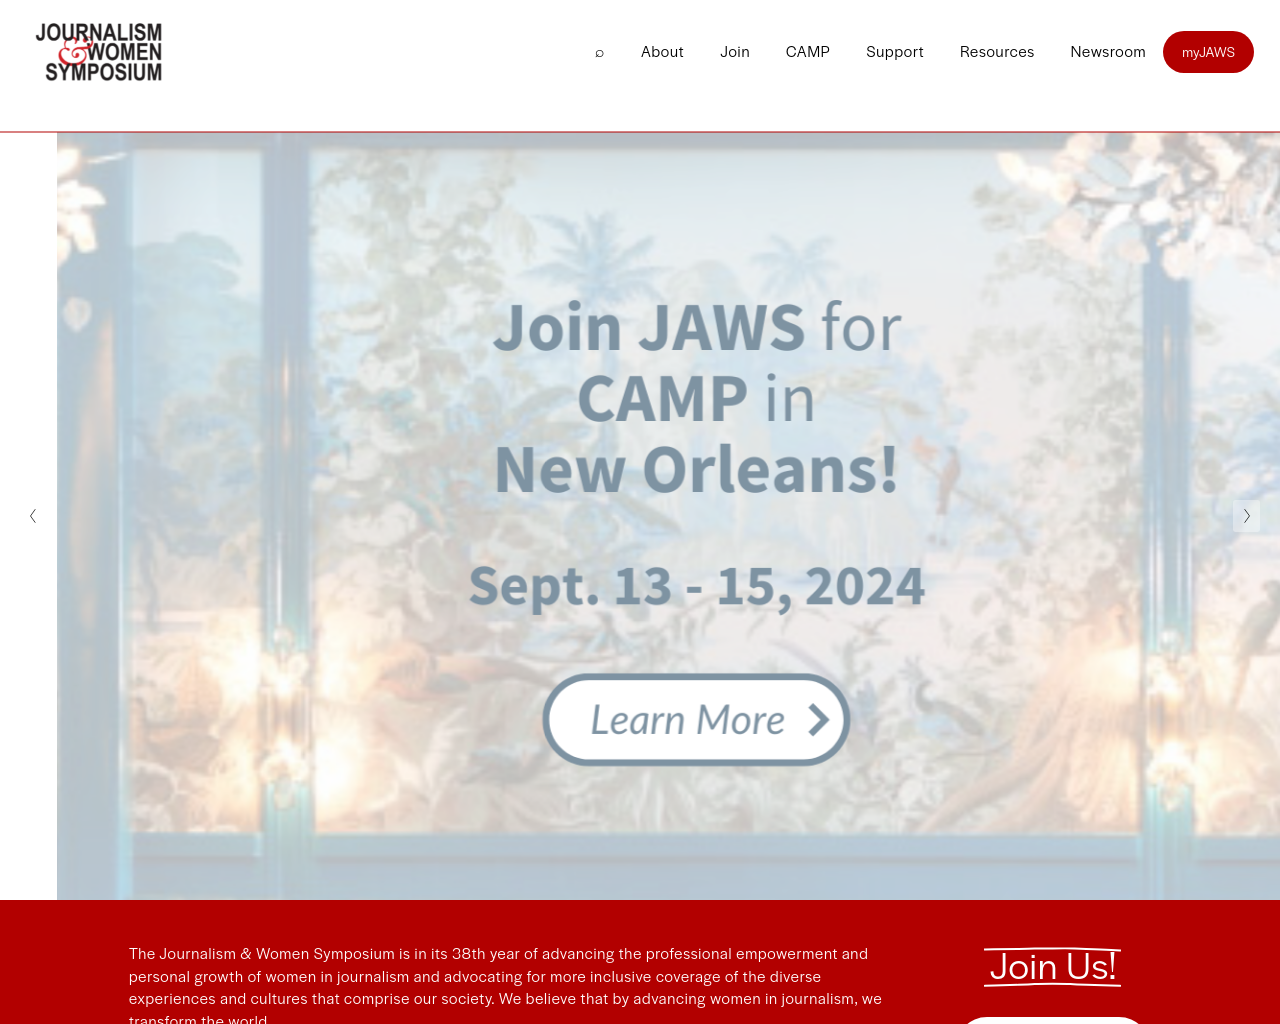 jaws.org